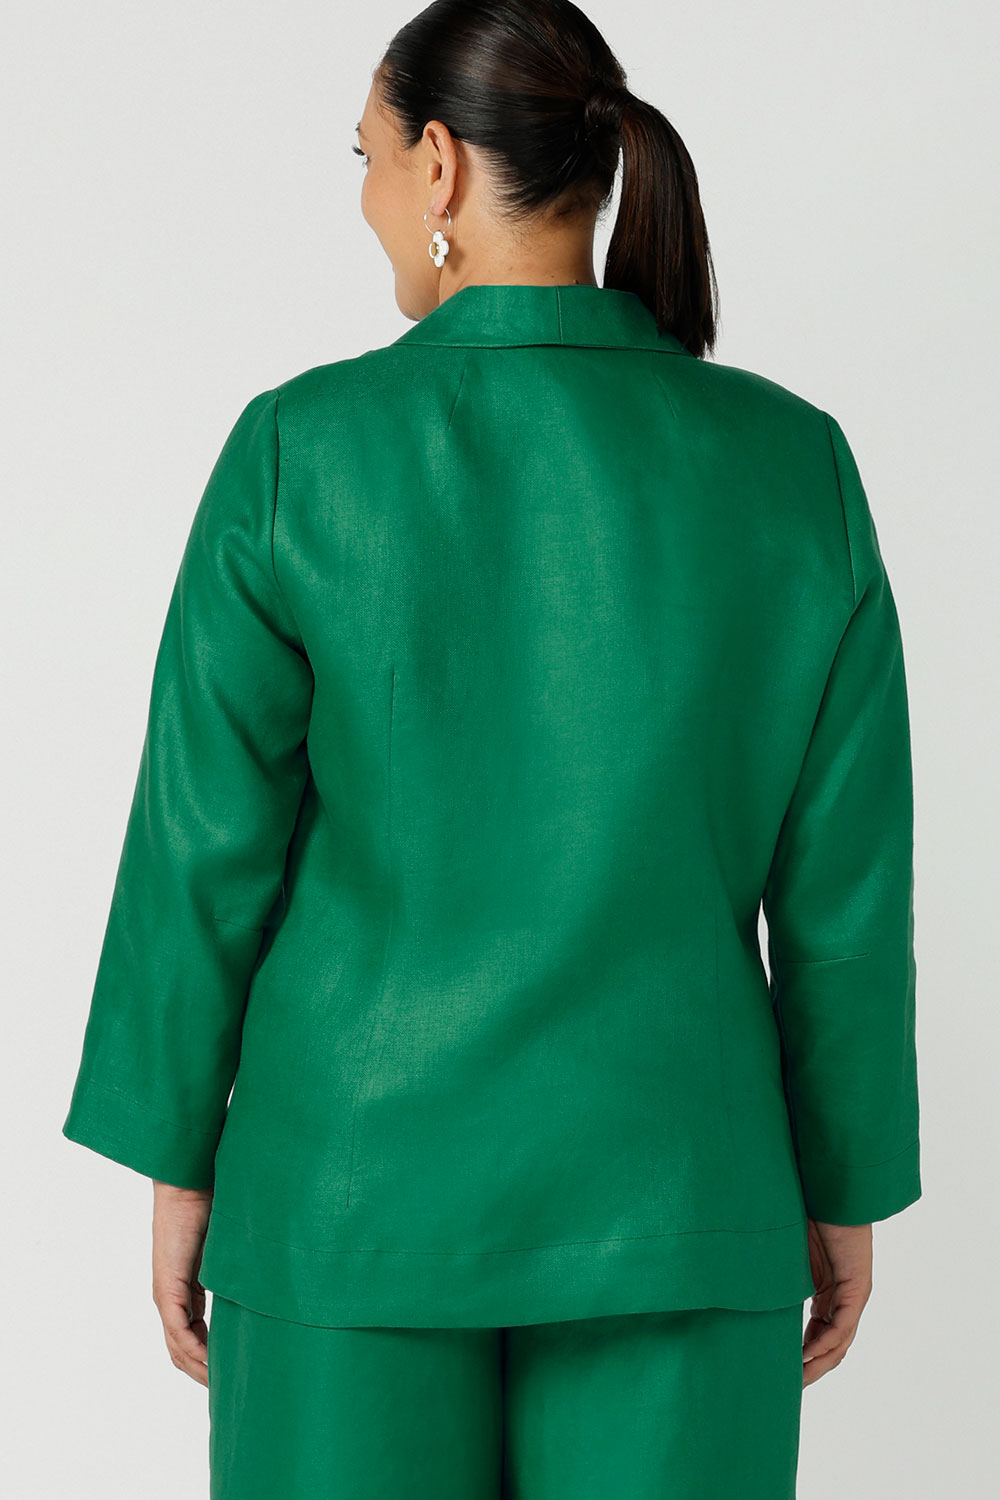 Back view of a size 12 woman wears a soft linen blazer jacket with a tailored design. A transeasonal linen work jacket, in a beautiful emerald green colour. Australian-made using sustainable 100% linen fabric. Size-inclusive fashion 8-24 for corporate casual workwear.